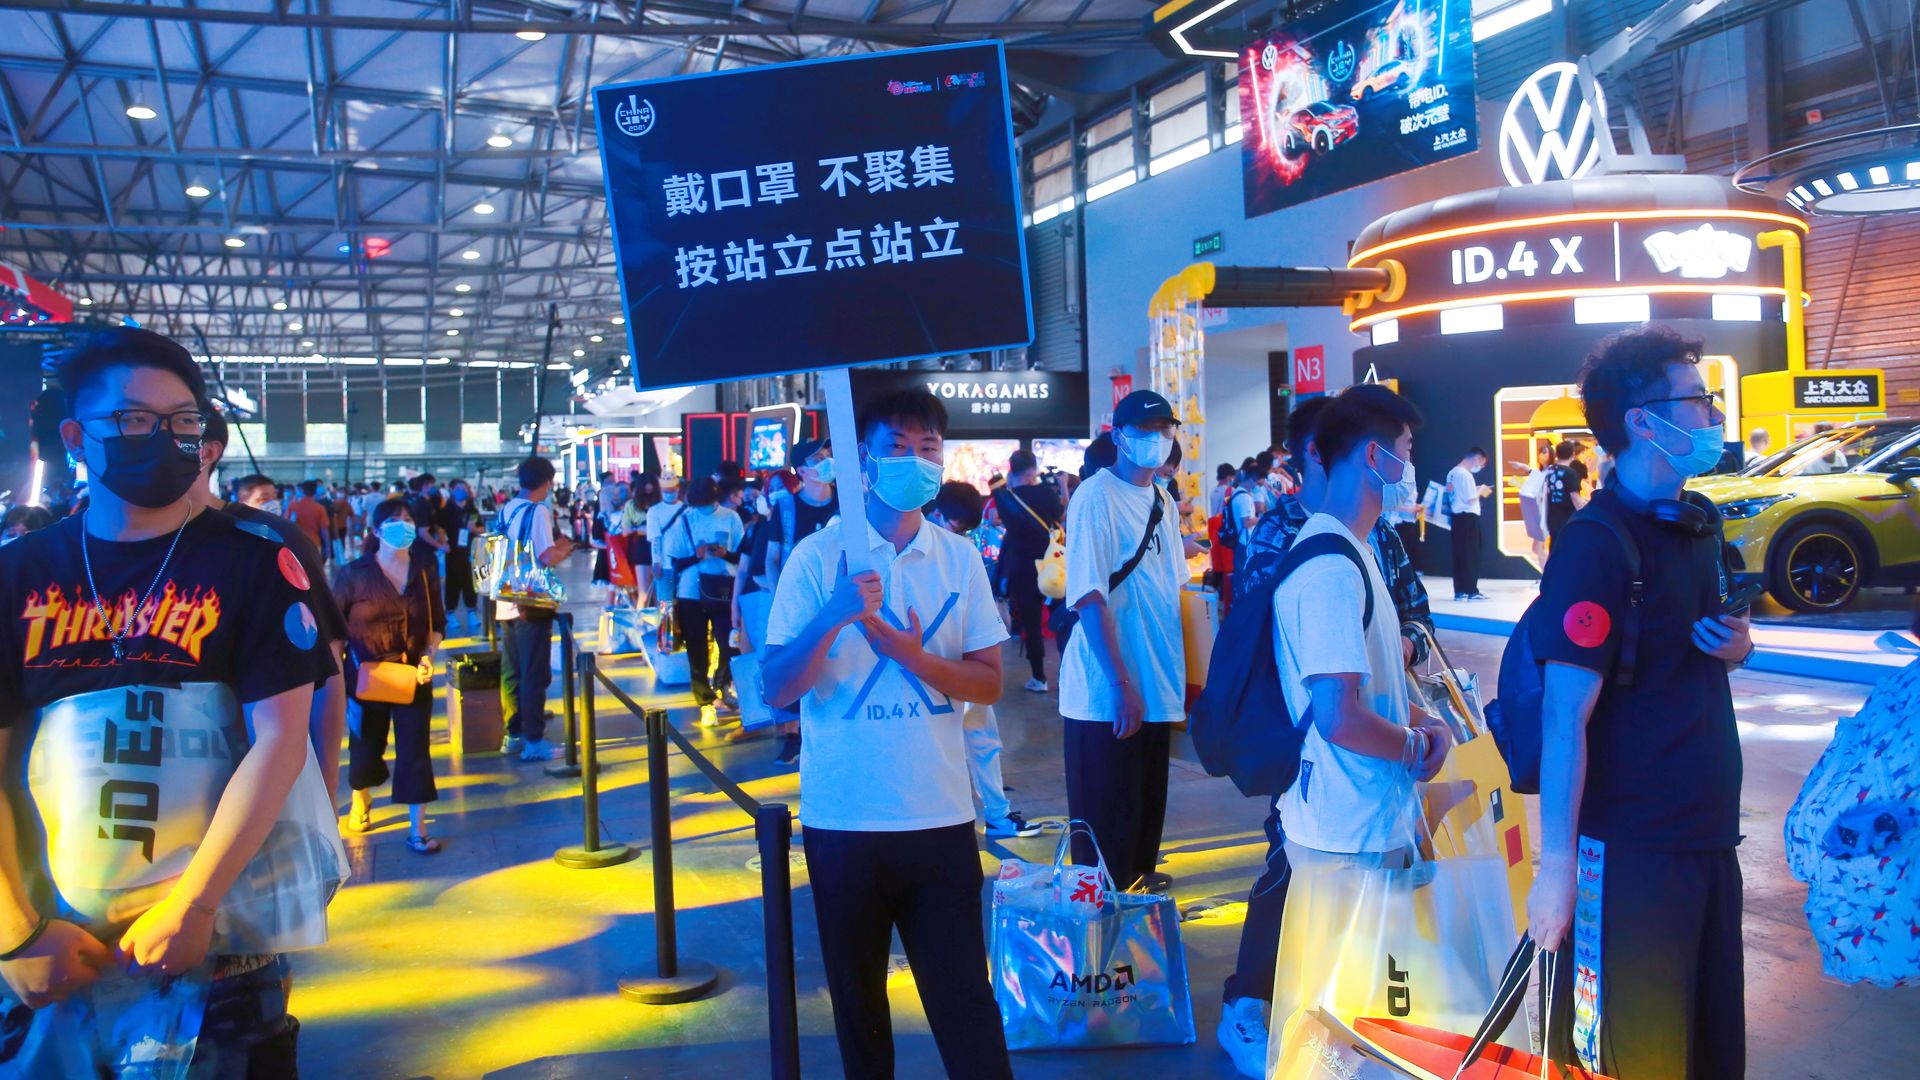 People at a gaming convention in China. A man holds a sign telling people to practice social distancing.